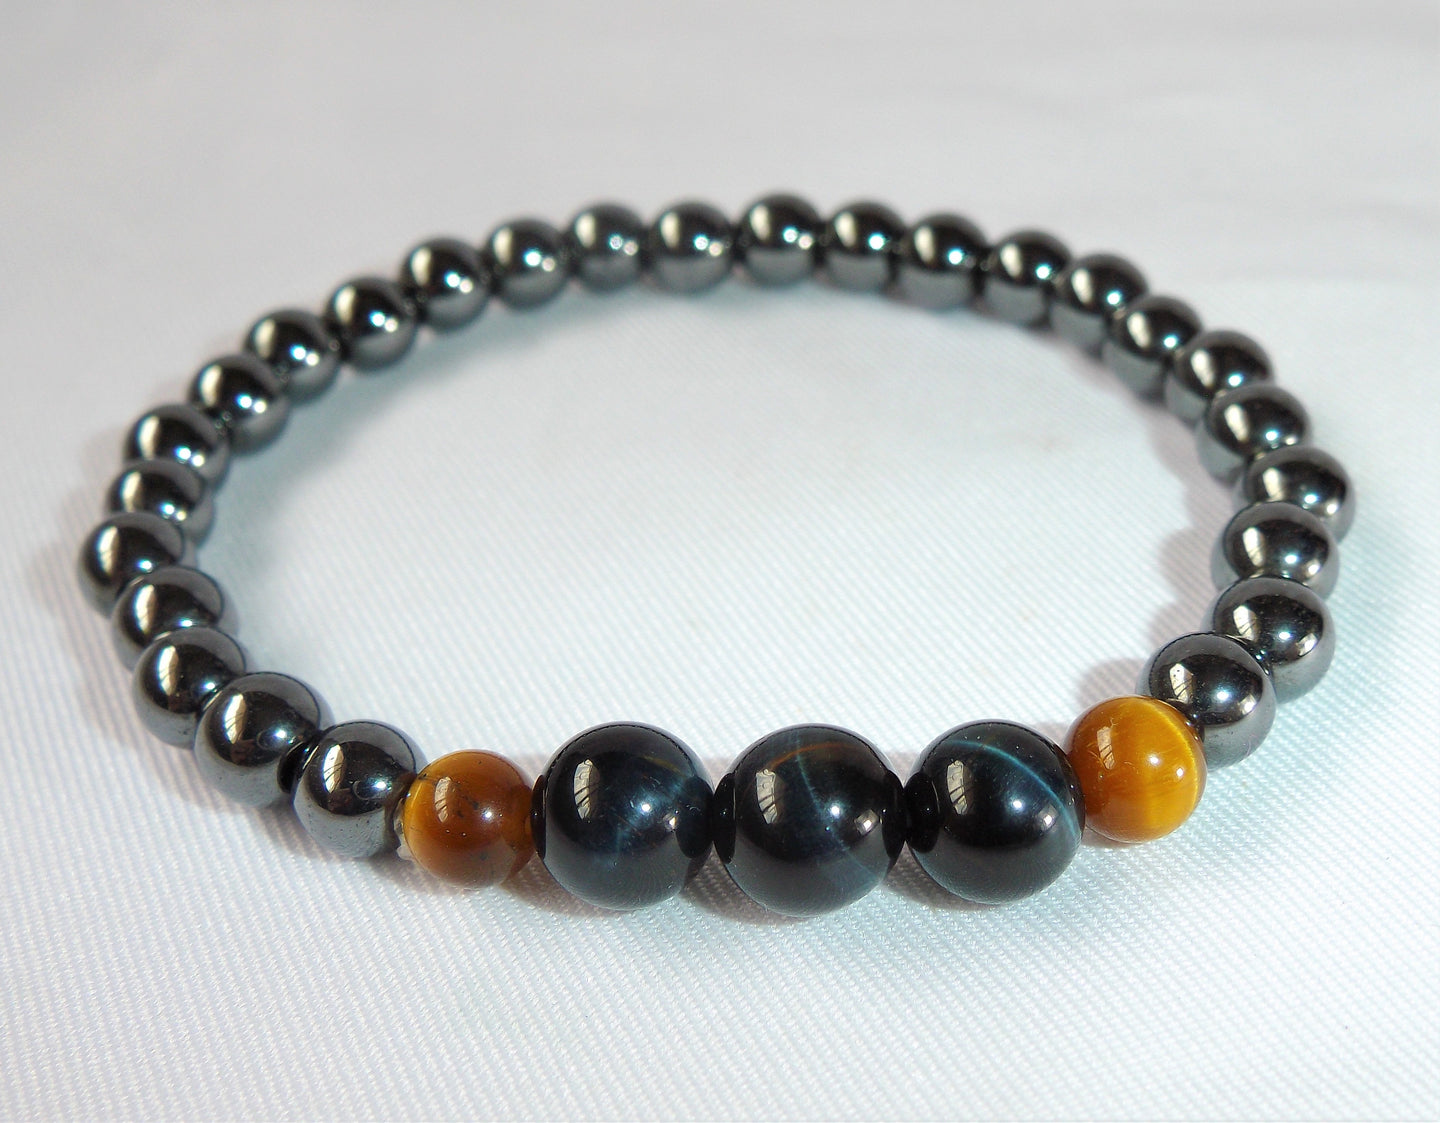 Hermatite and Gold Blue Tiger Eye Stone of Courage Confidence Crystal Beads Bracelet BRAC10100